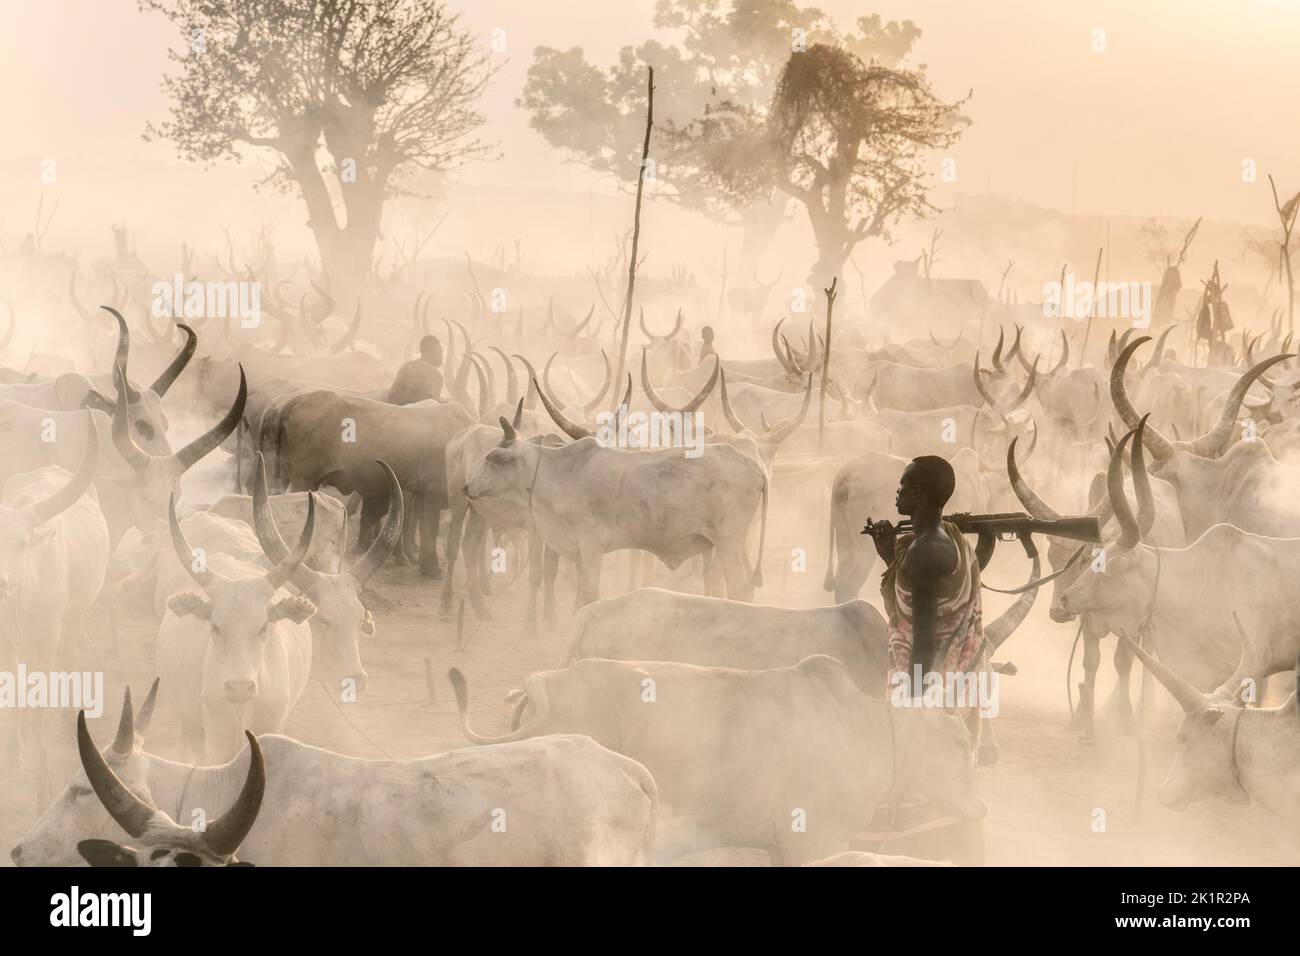 This herder is armed with a gun, protecting his cattle. South Sudan: THESE STUNNING images show the incredible bond between the Mundari people and the Stock Photo